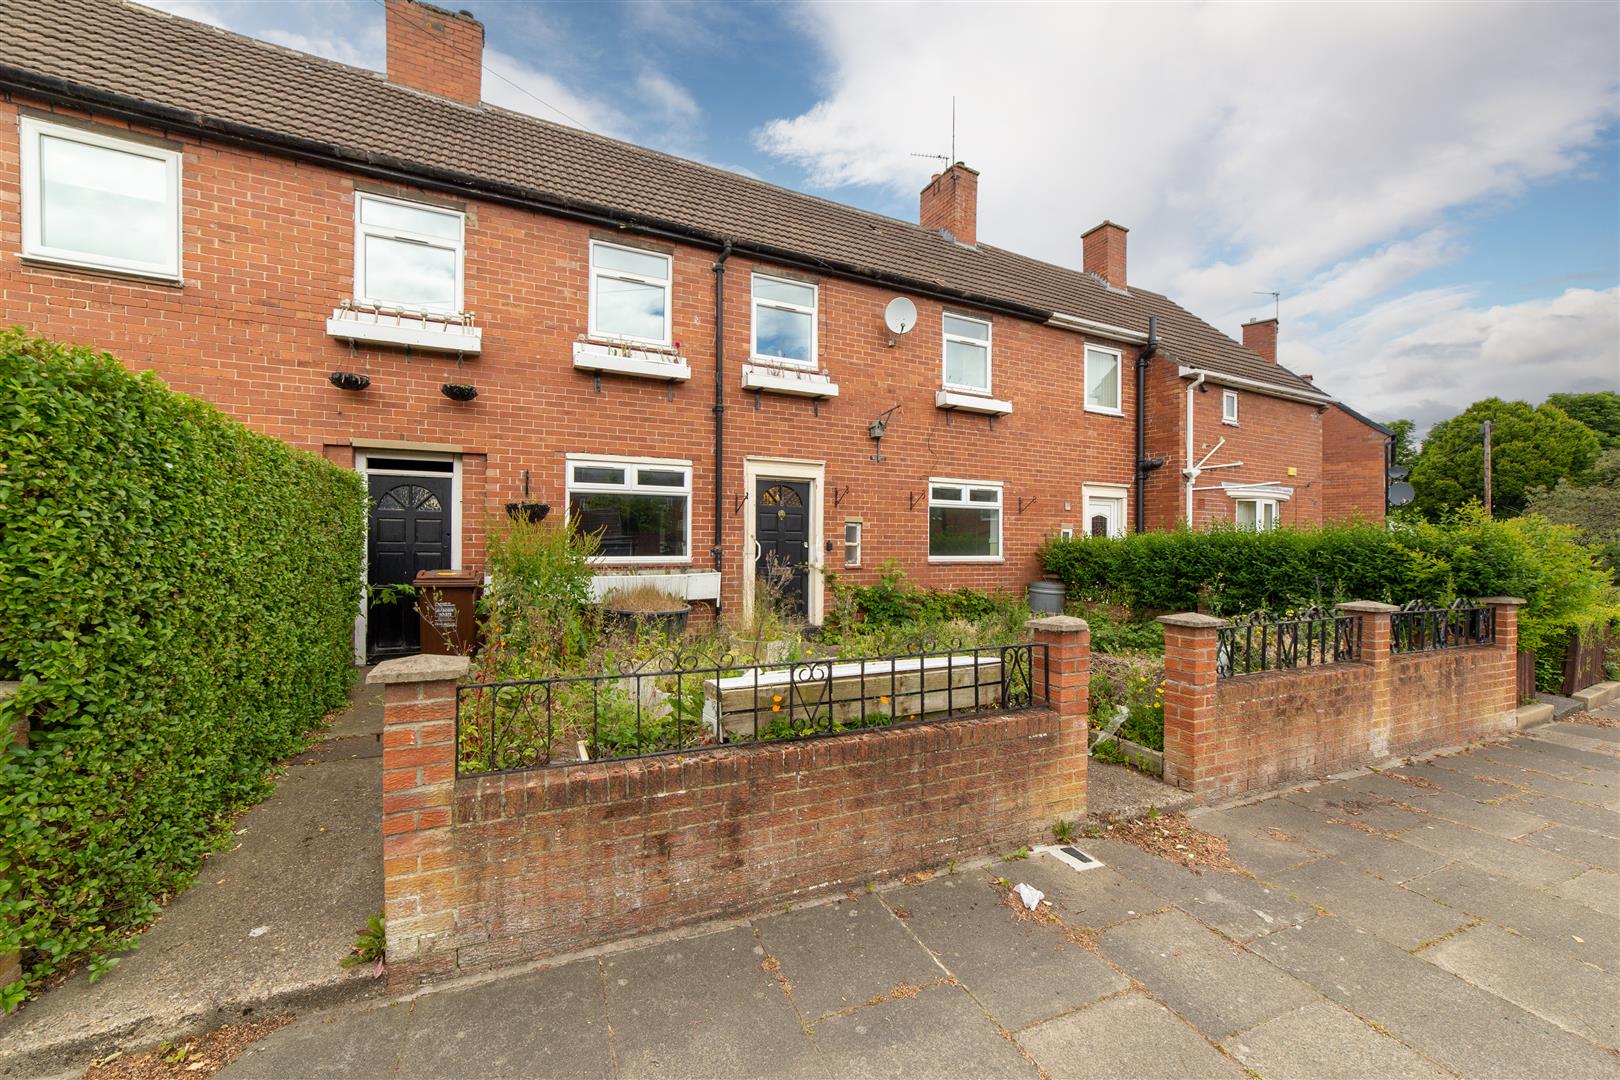 3 bed terraced house for sale in Lesbury Chase, Gosforth, NE3 